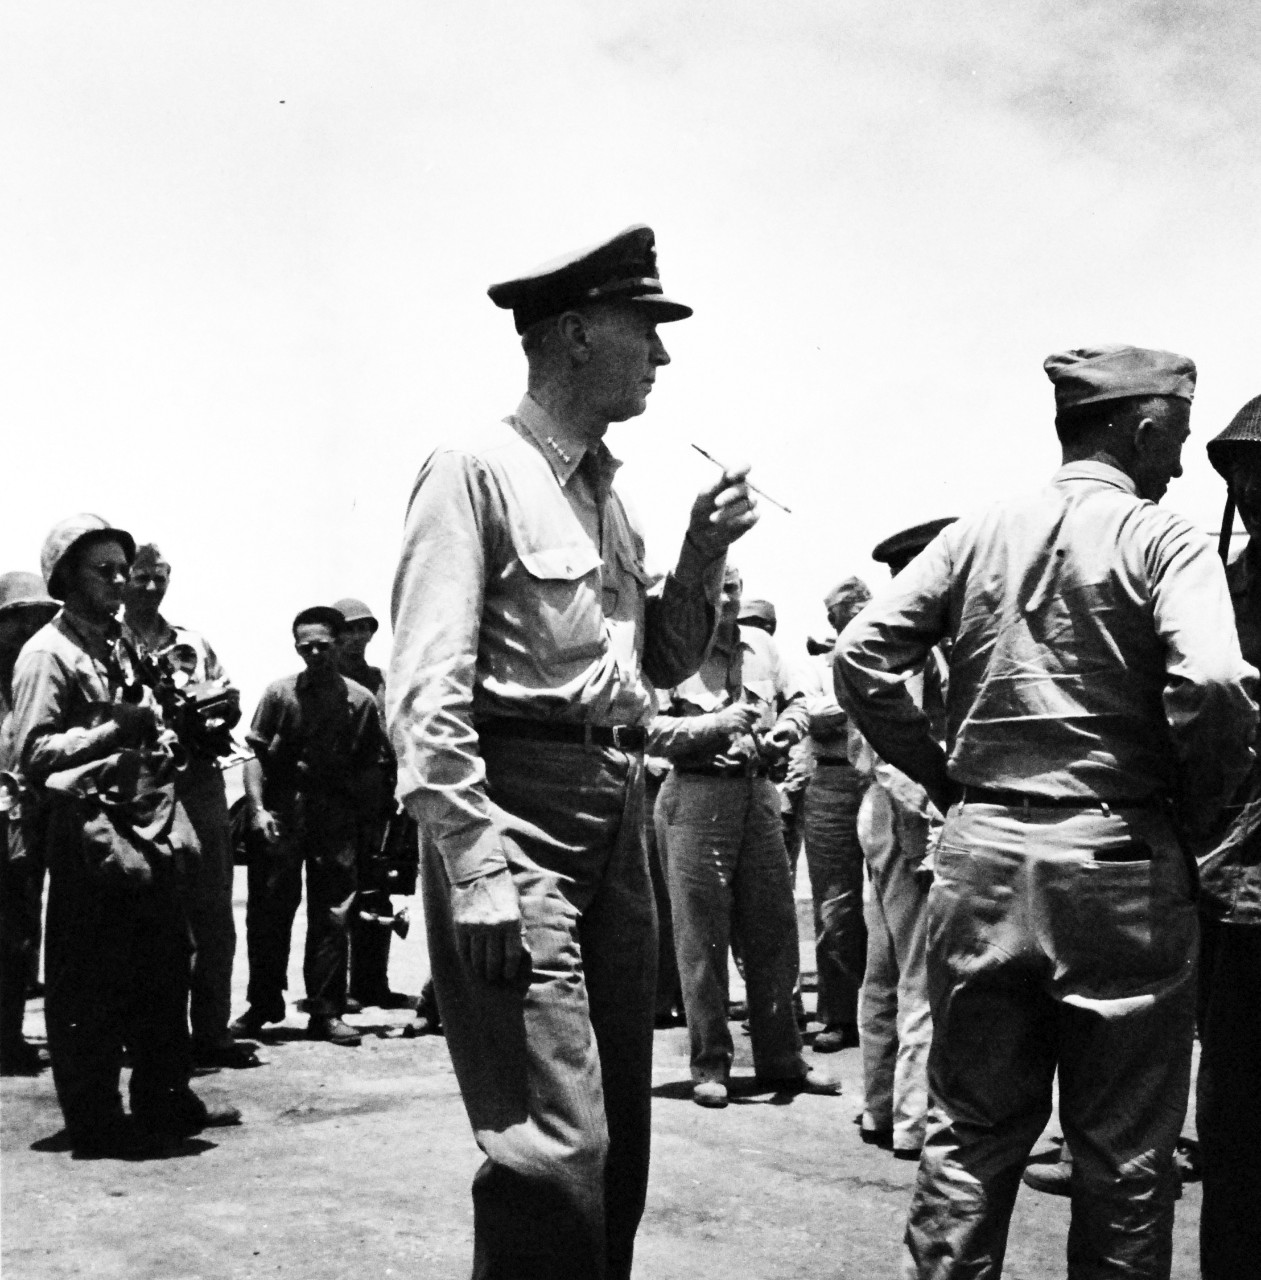 80-G-475148:  Invasion of Saipan, June-July 1944.  Admiral Ernest J. King, Commander-in-Chief of U.S. Fleet, inspects airfield on Saipan.  Photographed by Lieutenant Paul Dorsey, July 1944, TR-10225.      Official U.S. Navy photograph, now in the collections of the National Archives.   (2017/03/15).